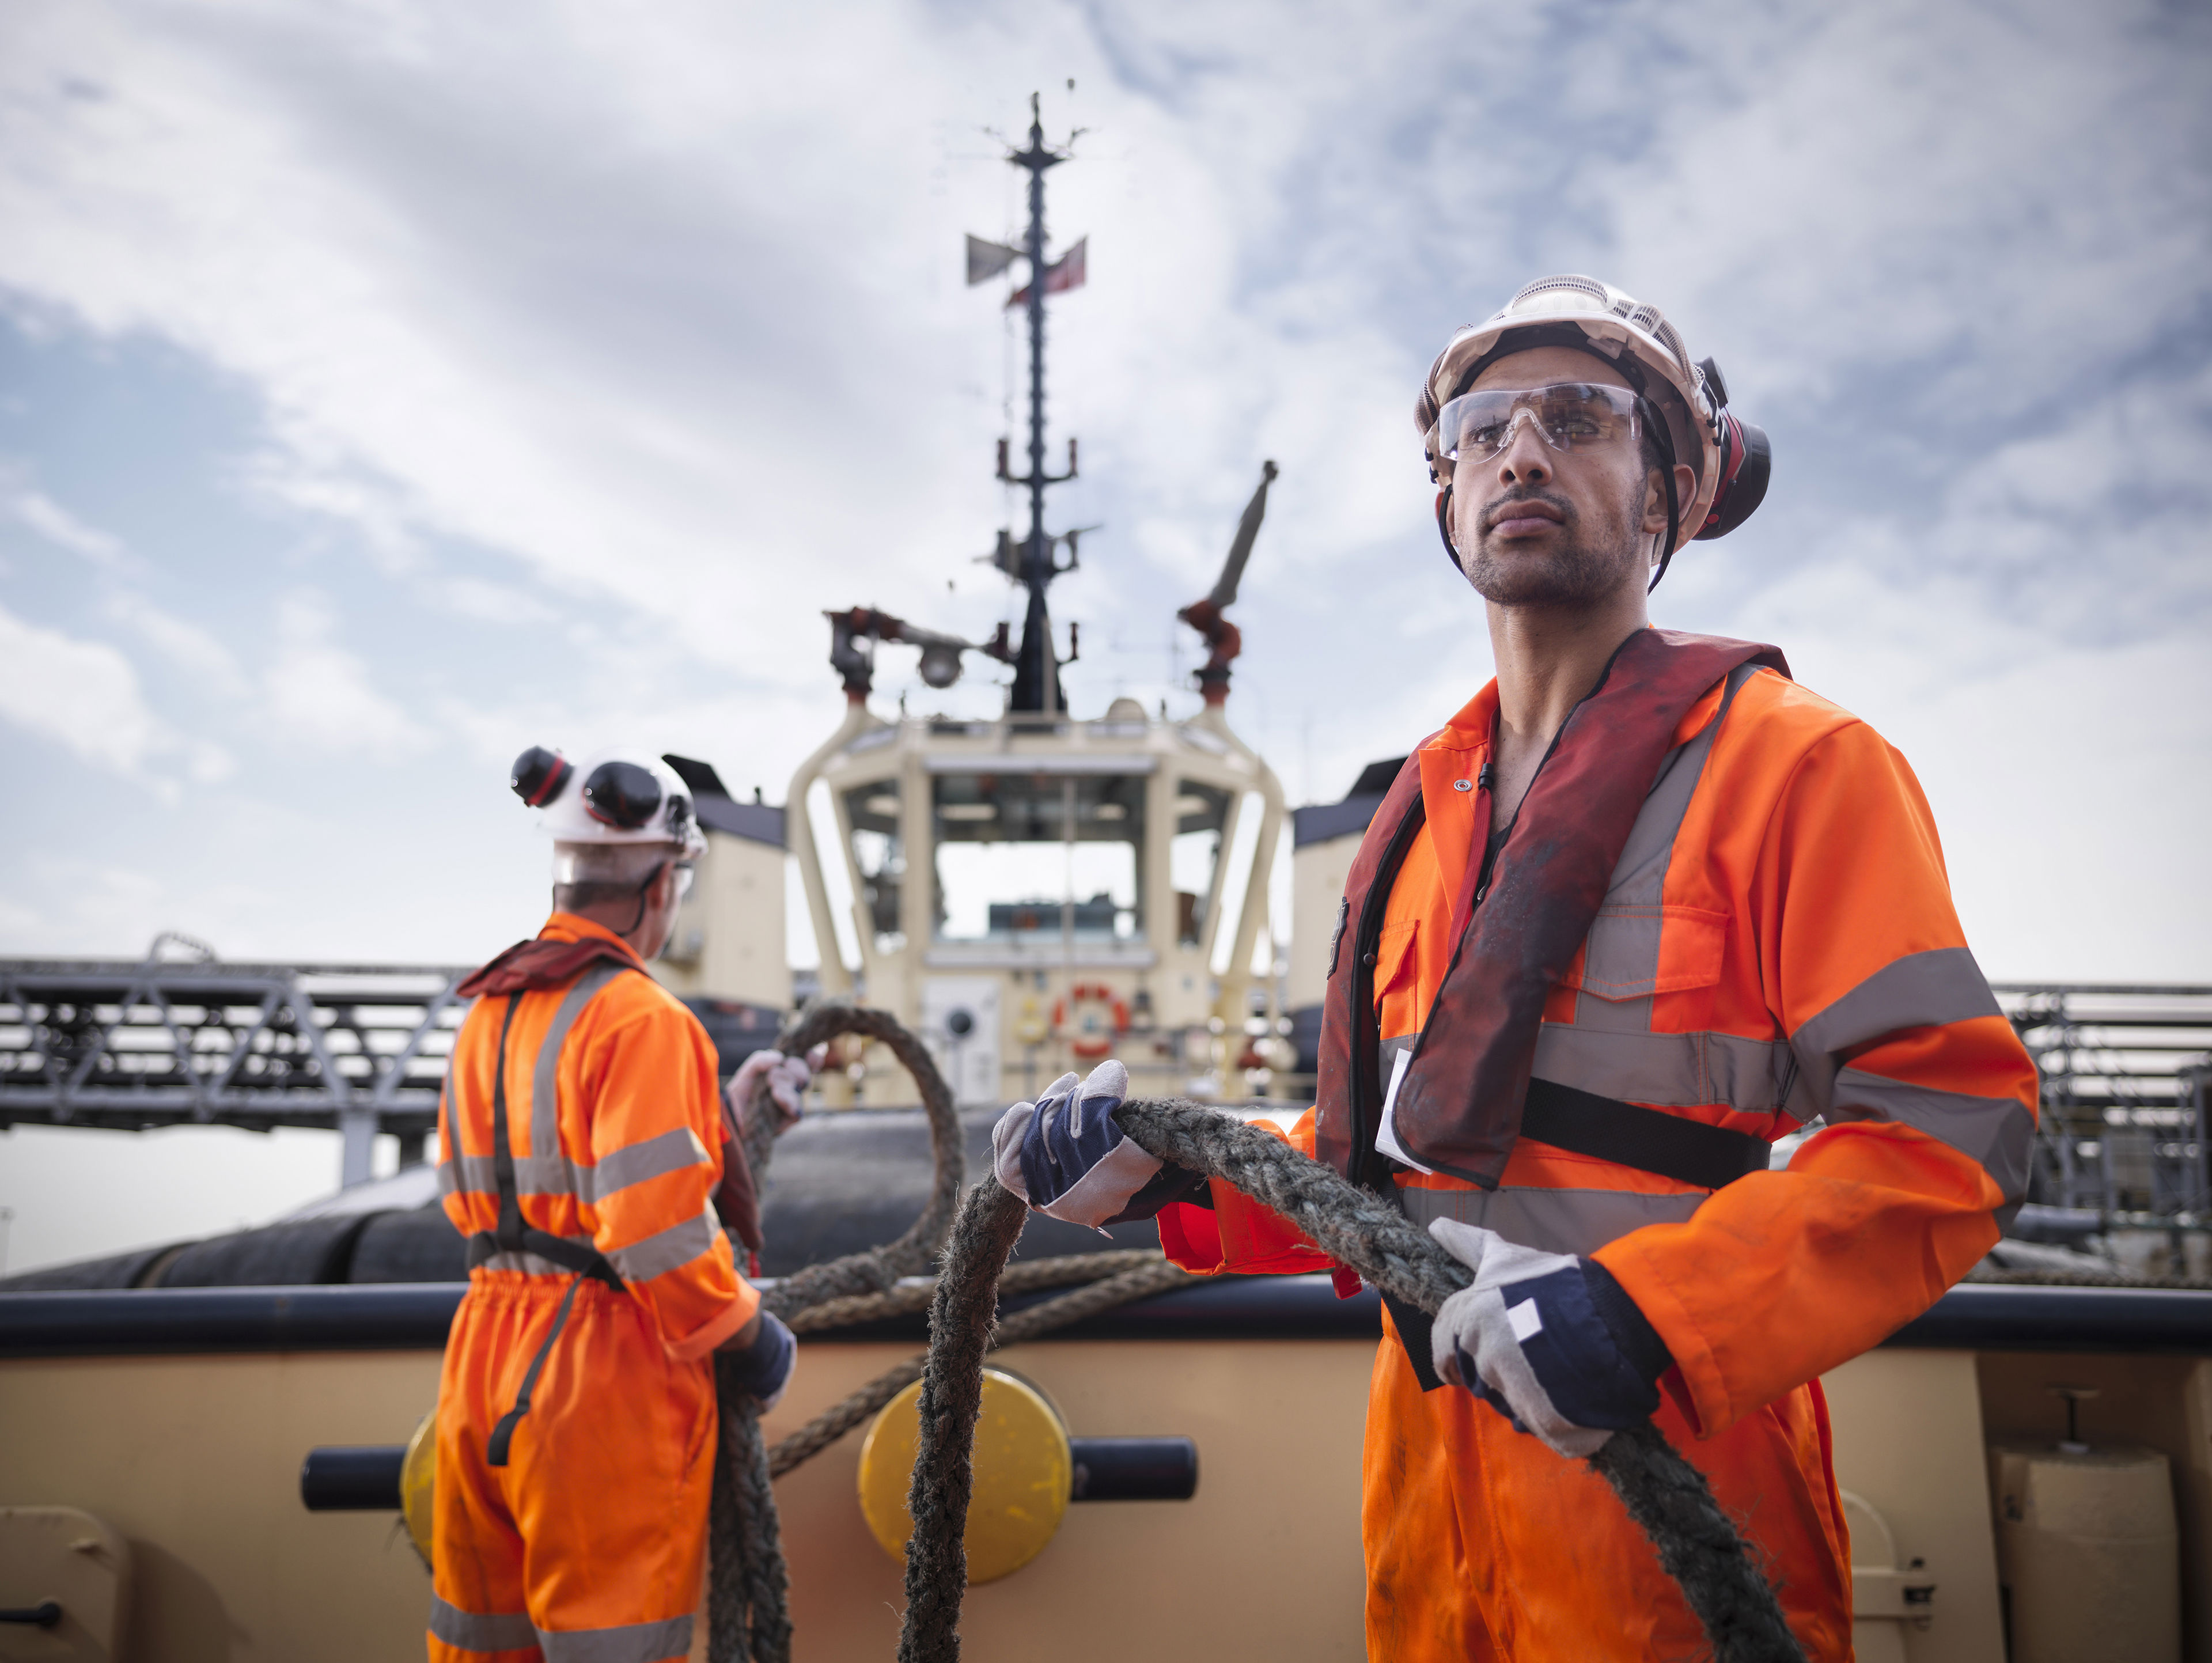 Tug Workers Wearing Protective Clothing Holding Rope On Tug